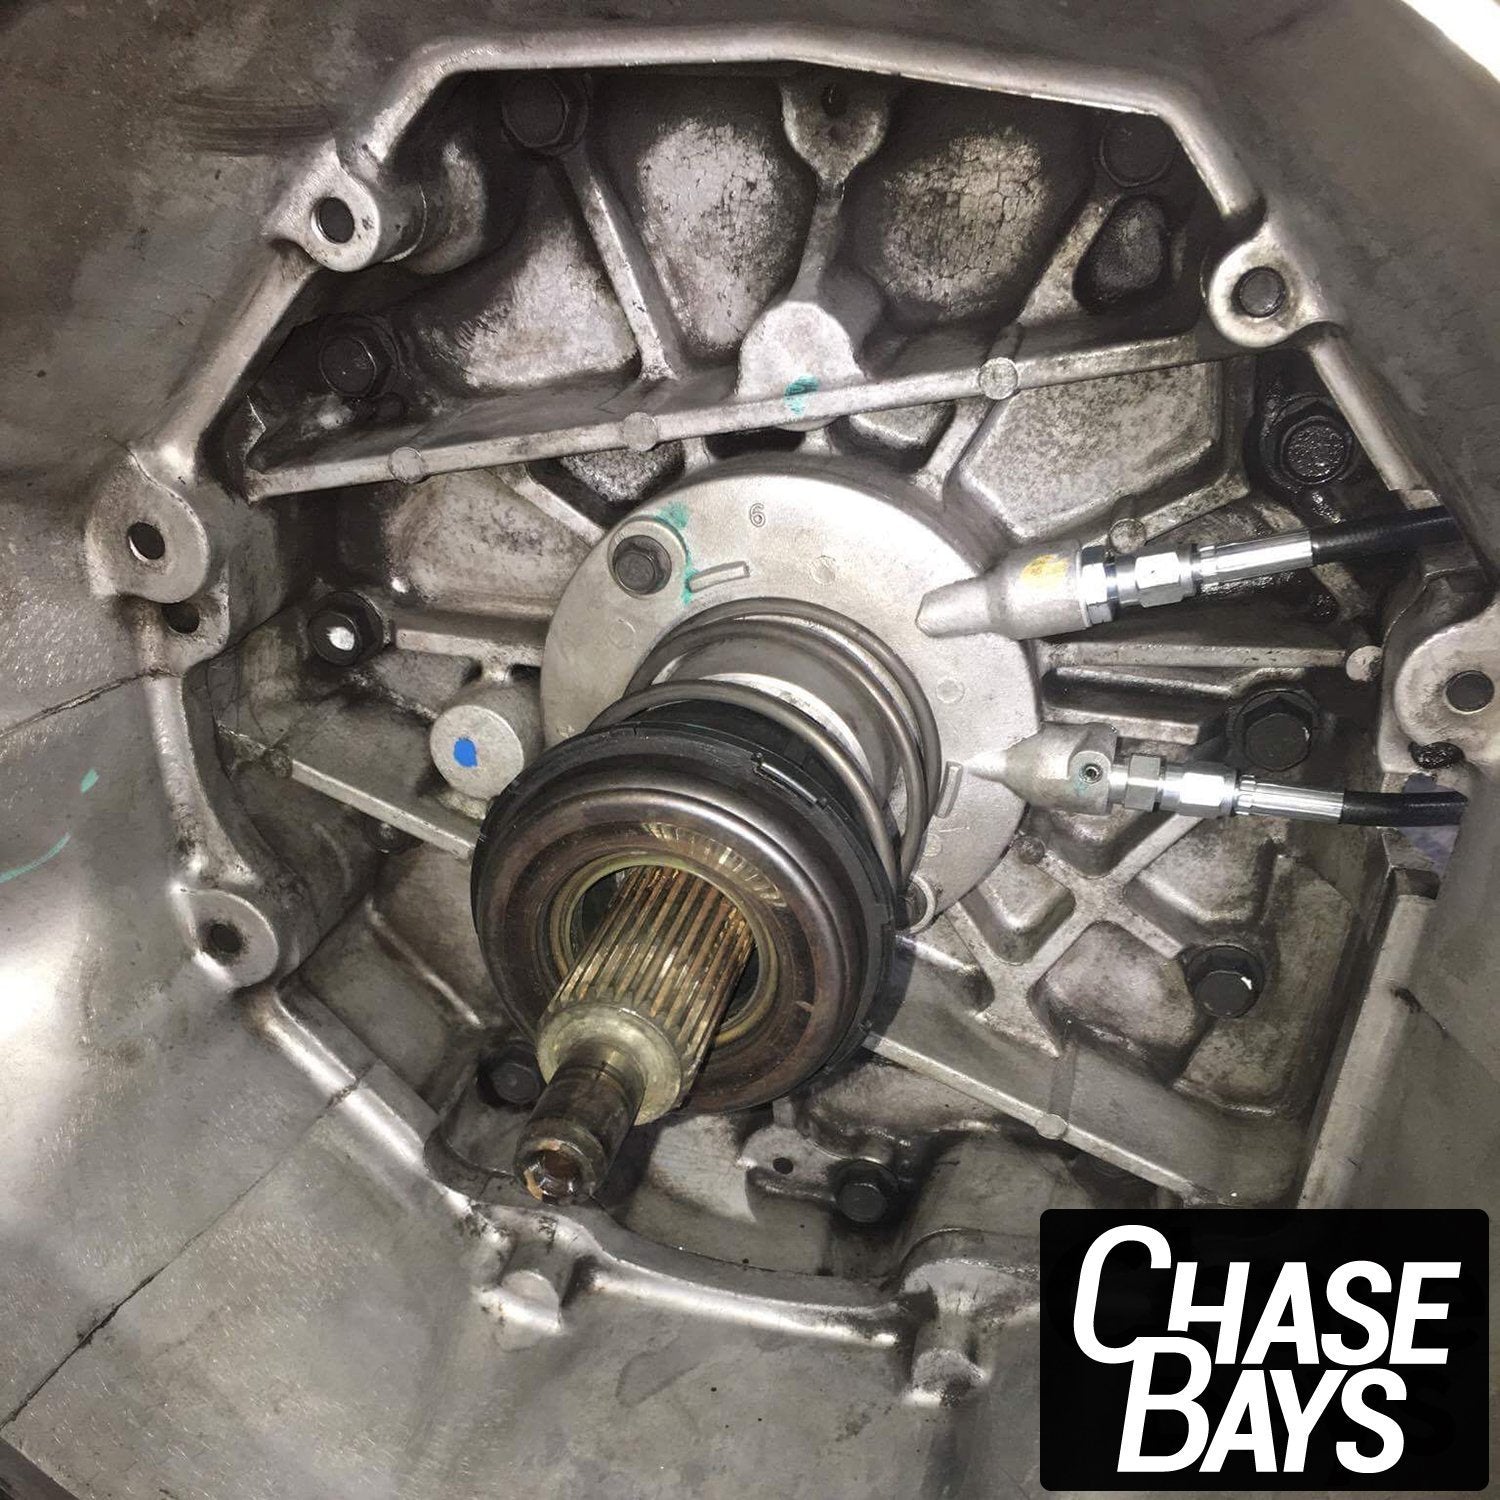 CHASE BAYS Mazda RX-7 FD clutch line with GM LS1 T56 gearbox - PARTS33 GmbH